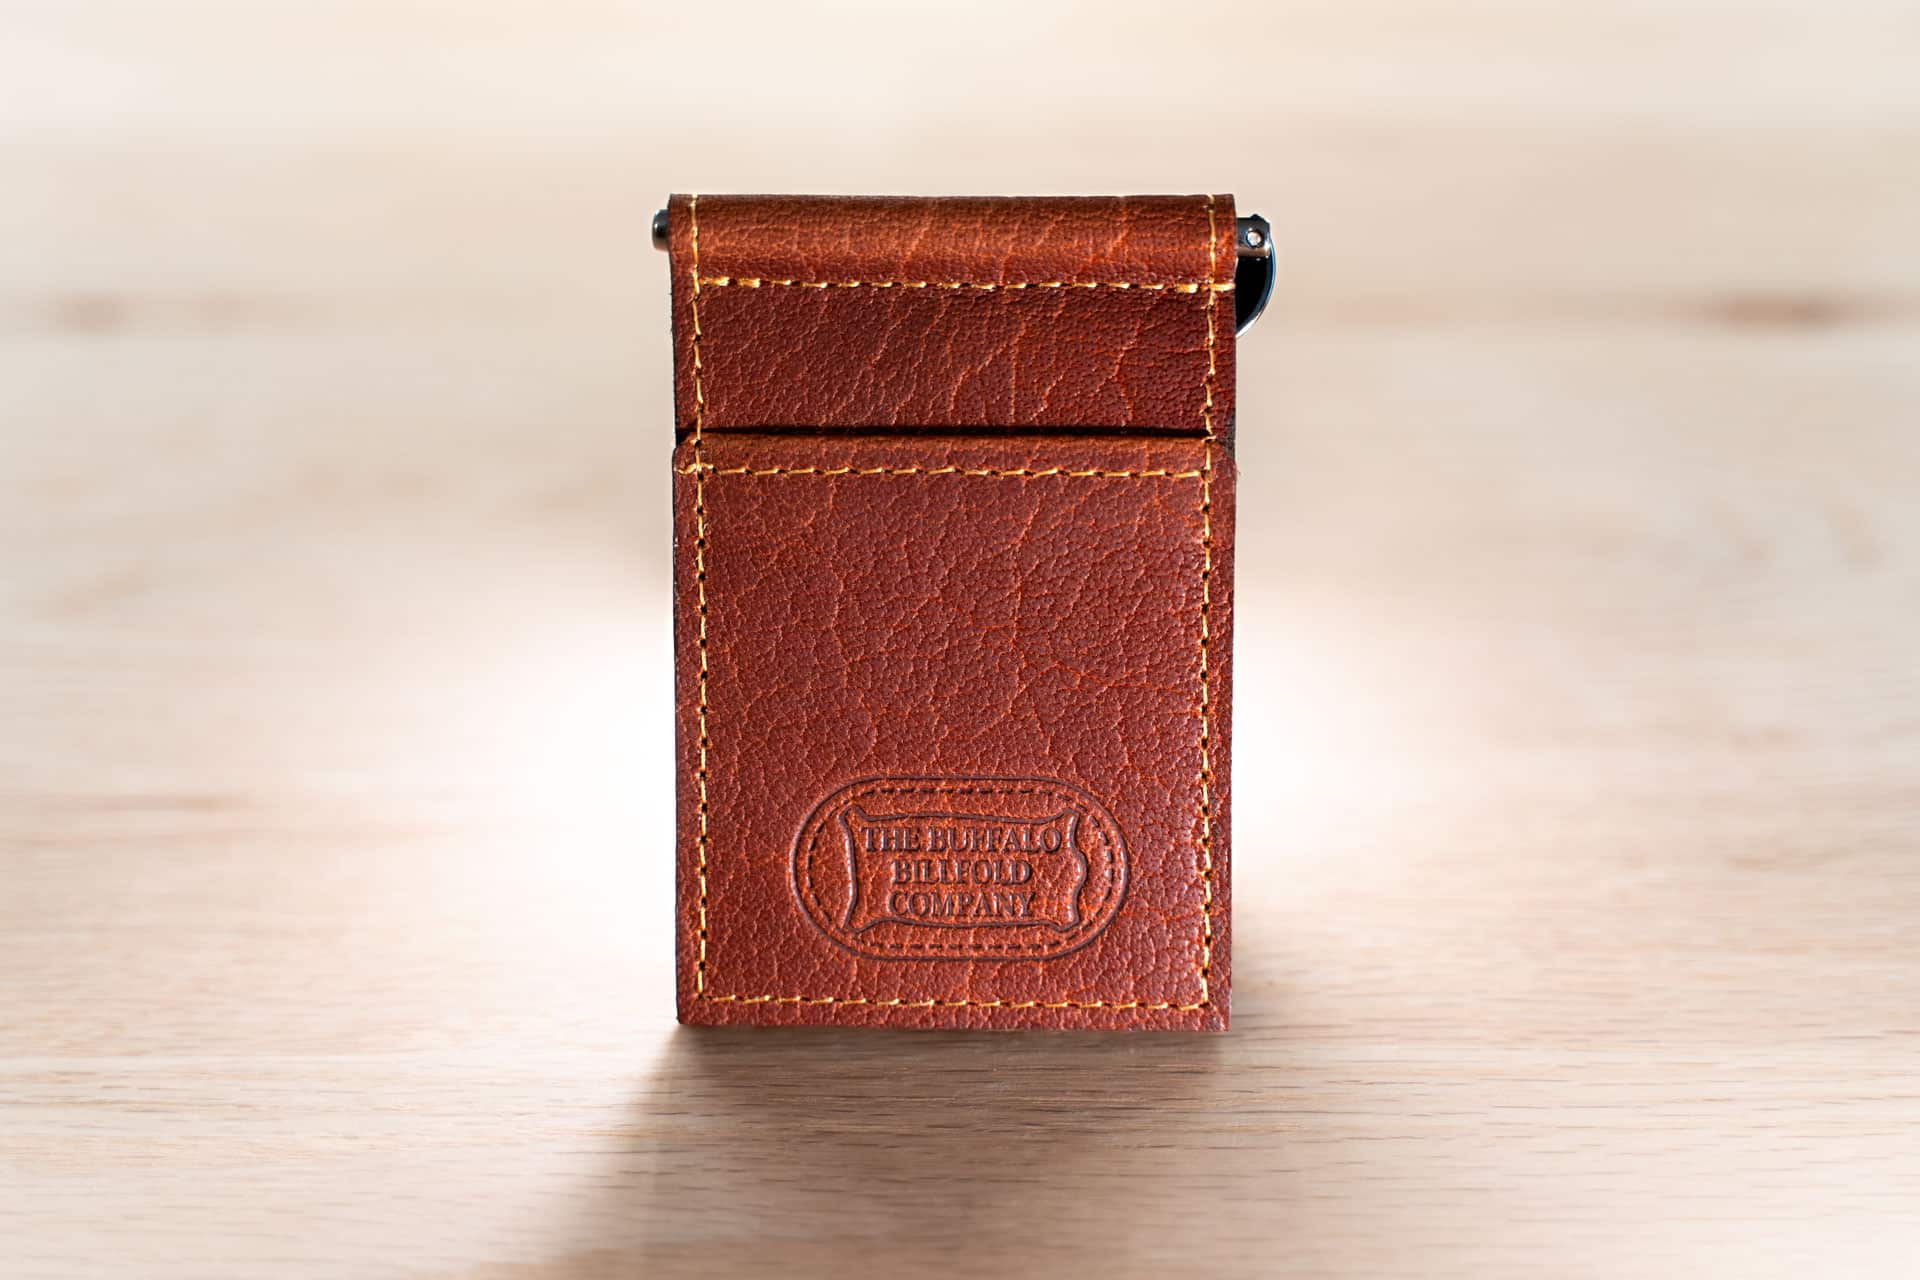 Simply Southern Papa Bear Leather Money Clip Wallet